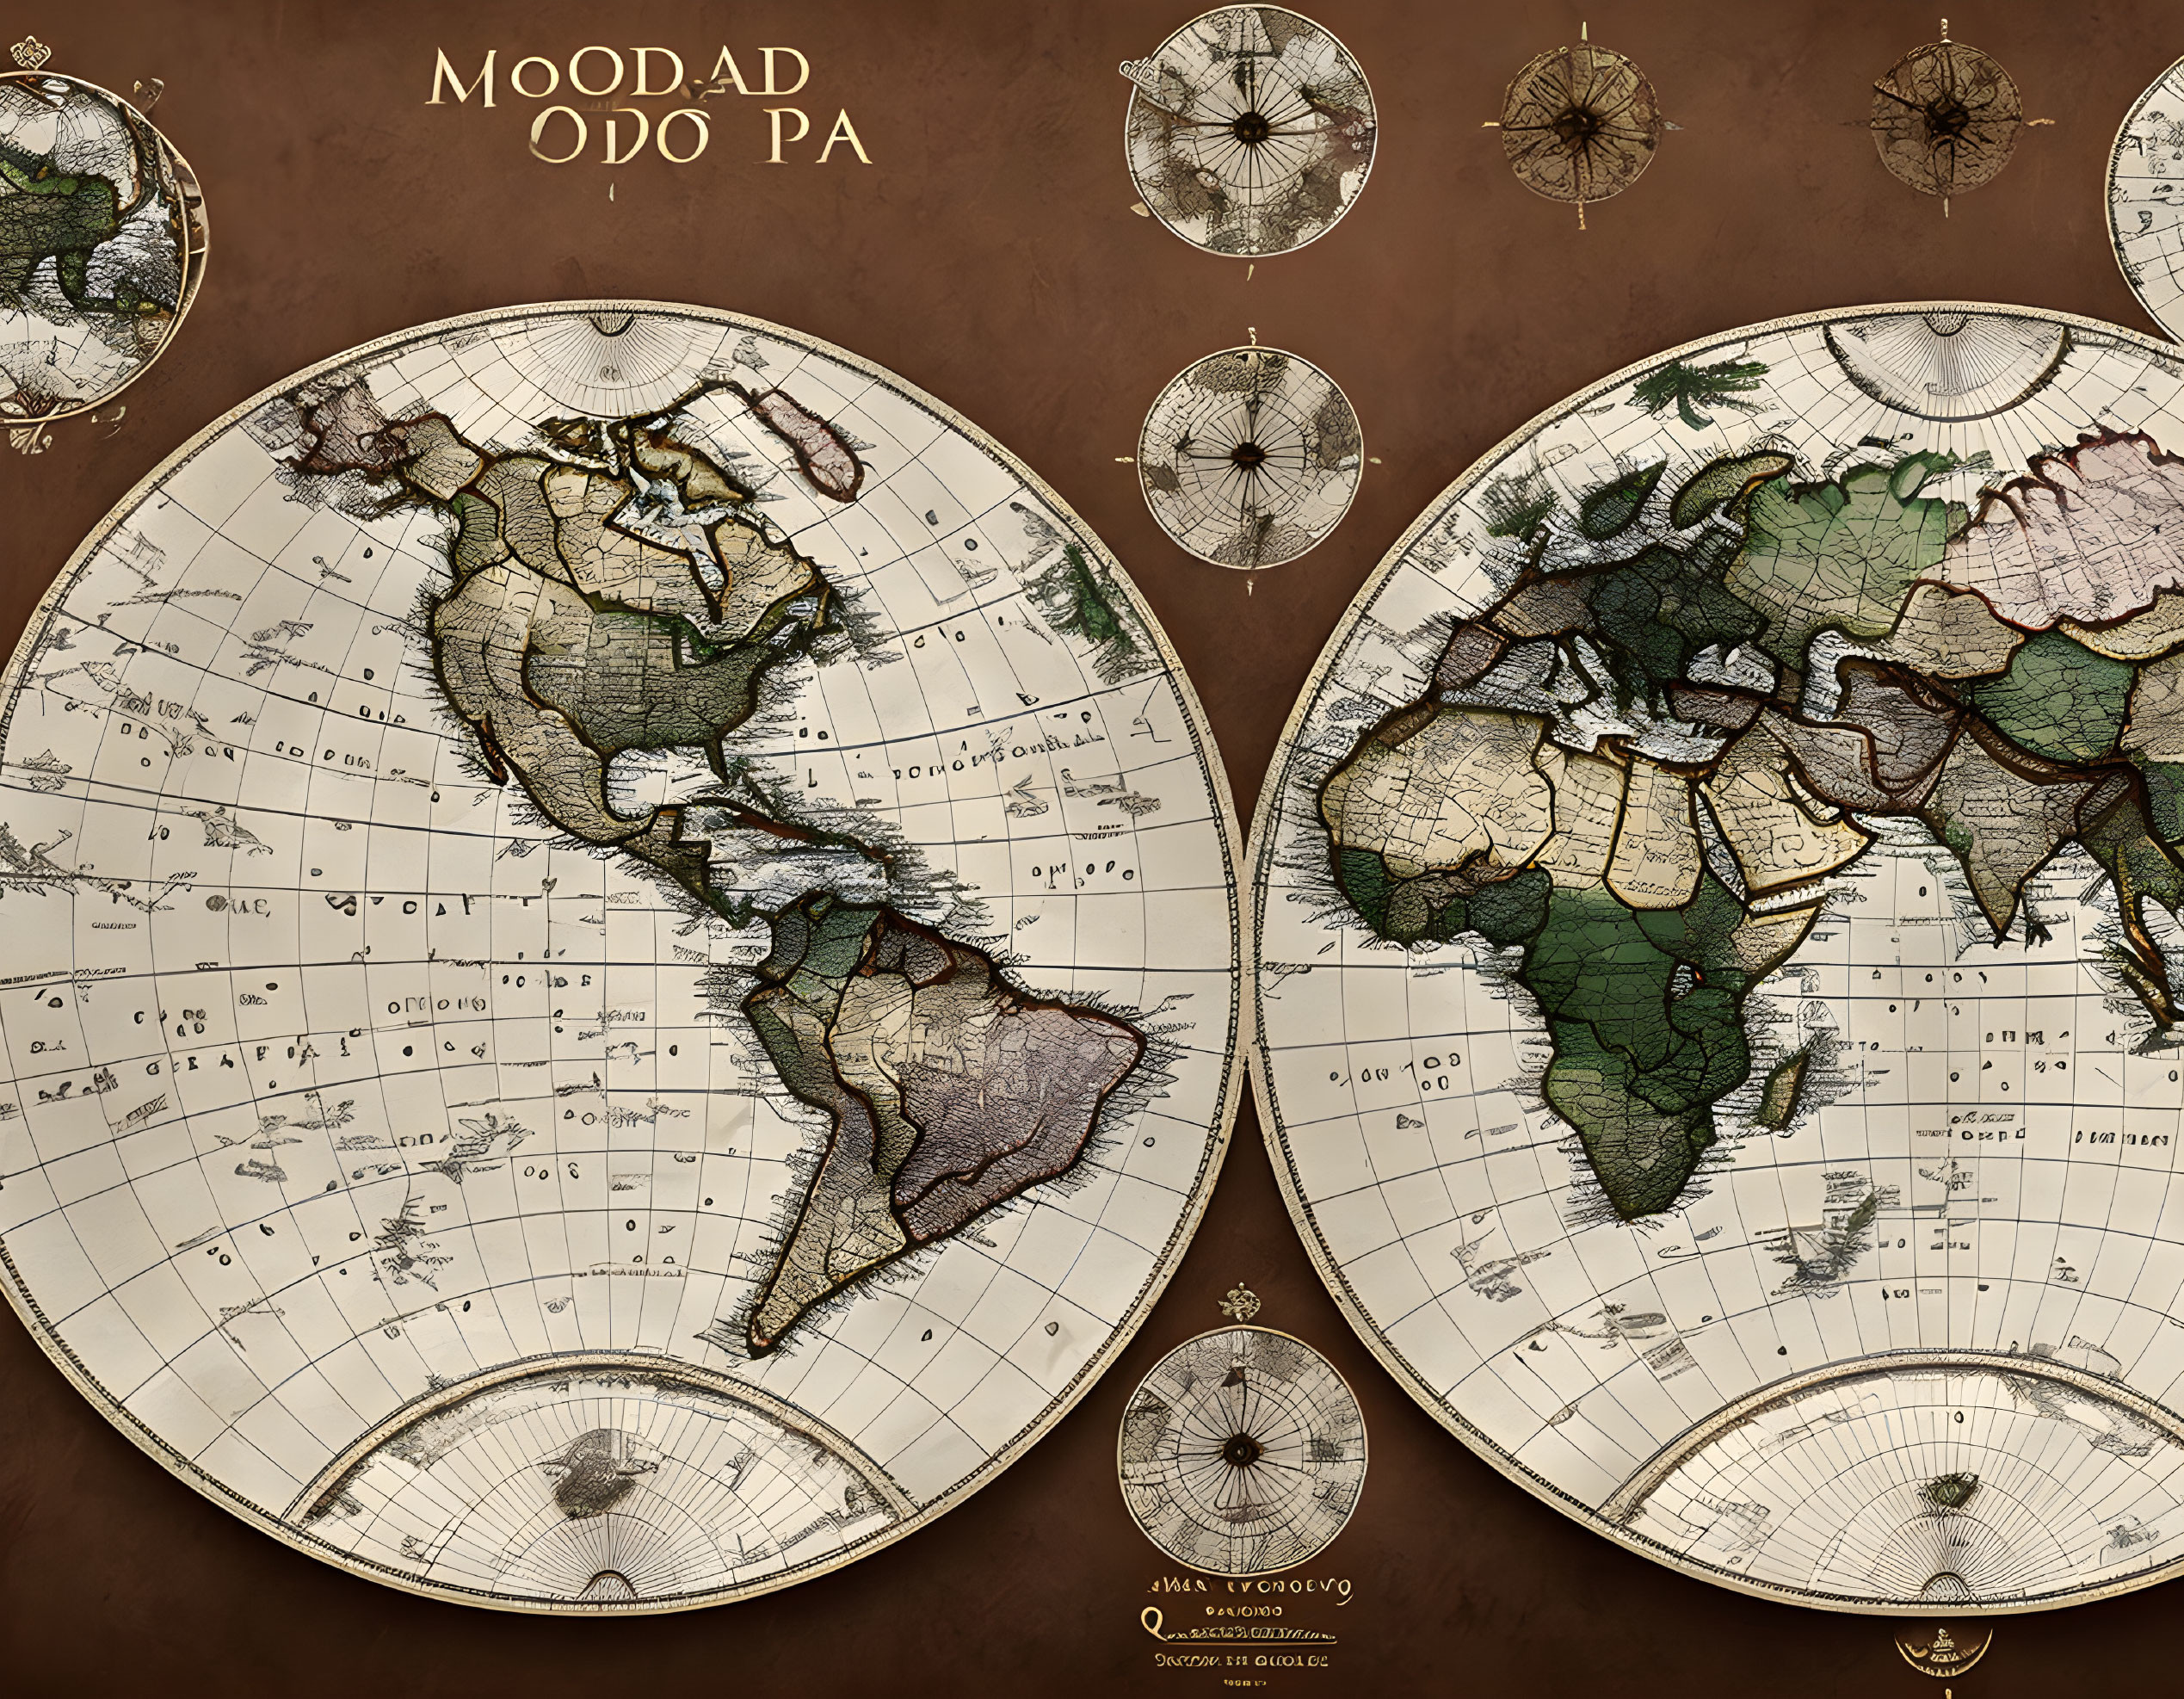 Circular Vintage World Map with Western and Eastern Hemispheres, Ornate Art, Old-Fashioned